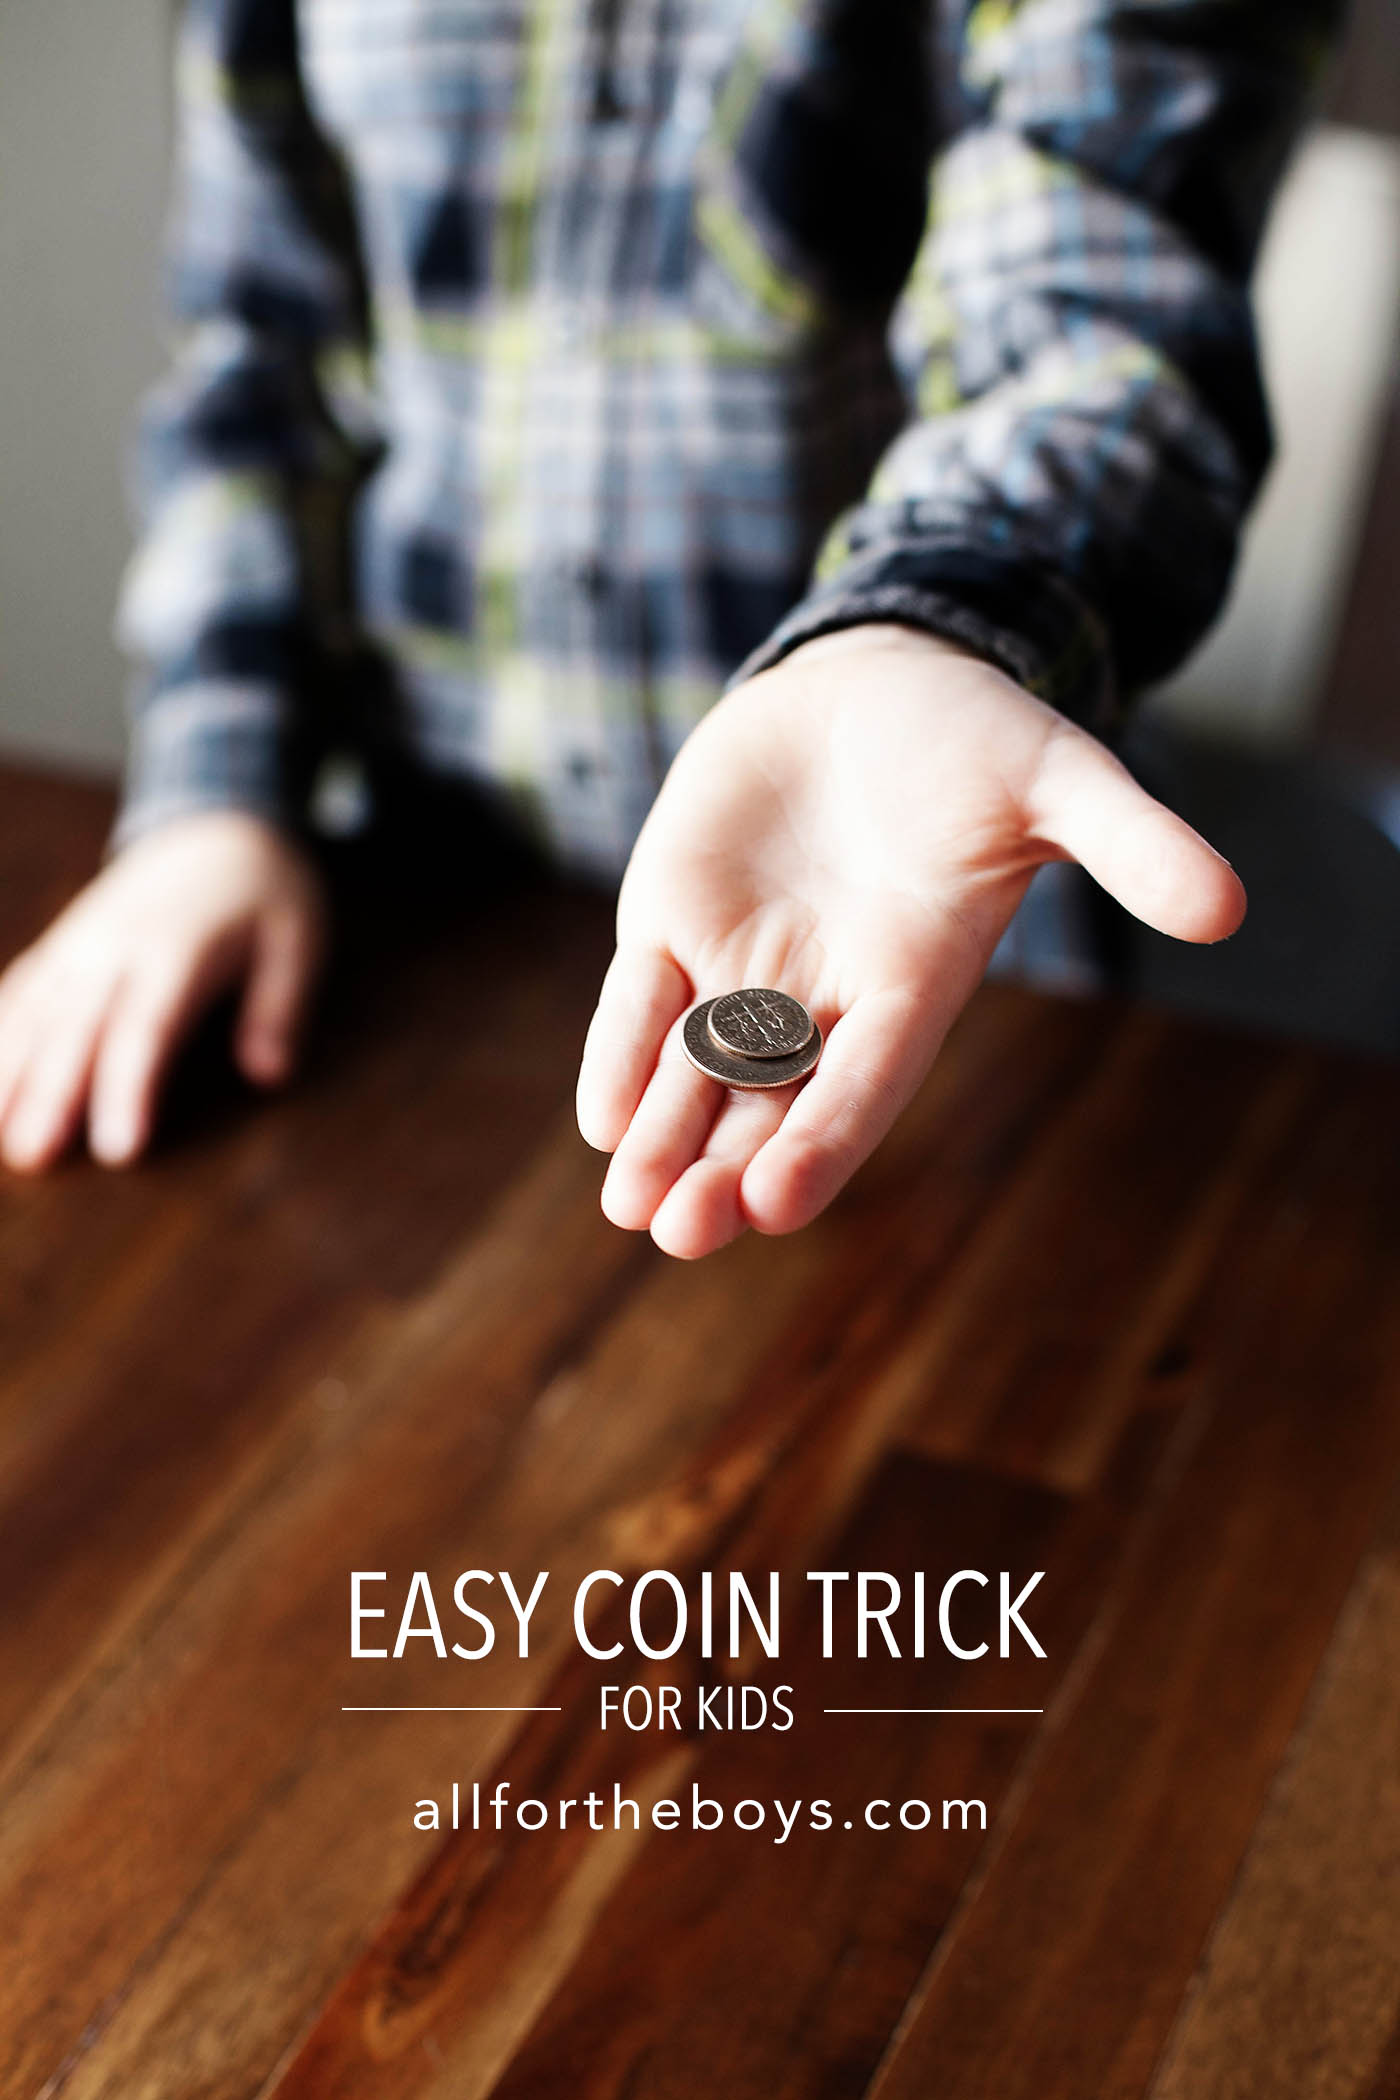 Easy coin trick for kids